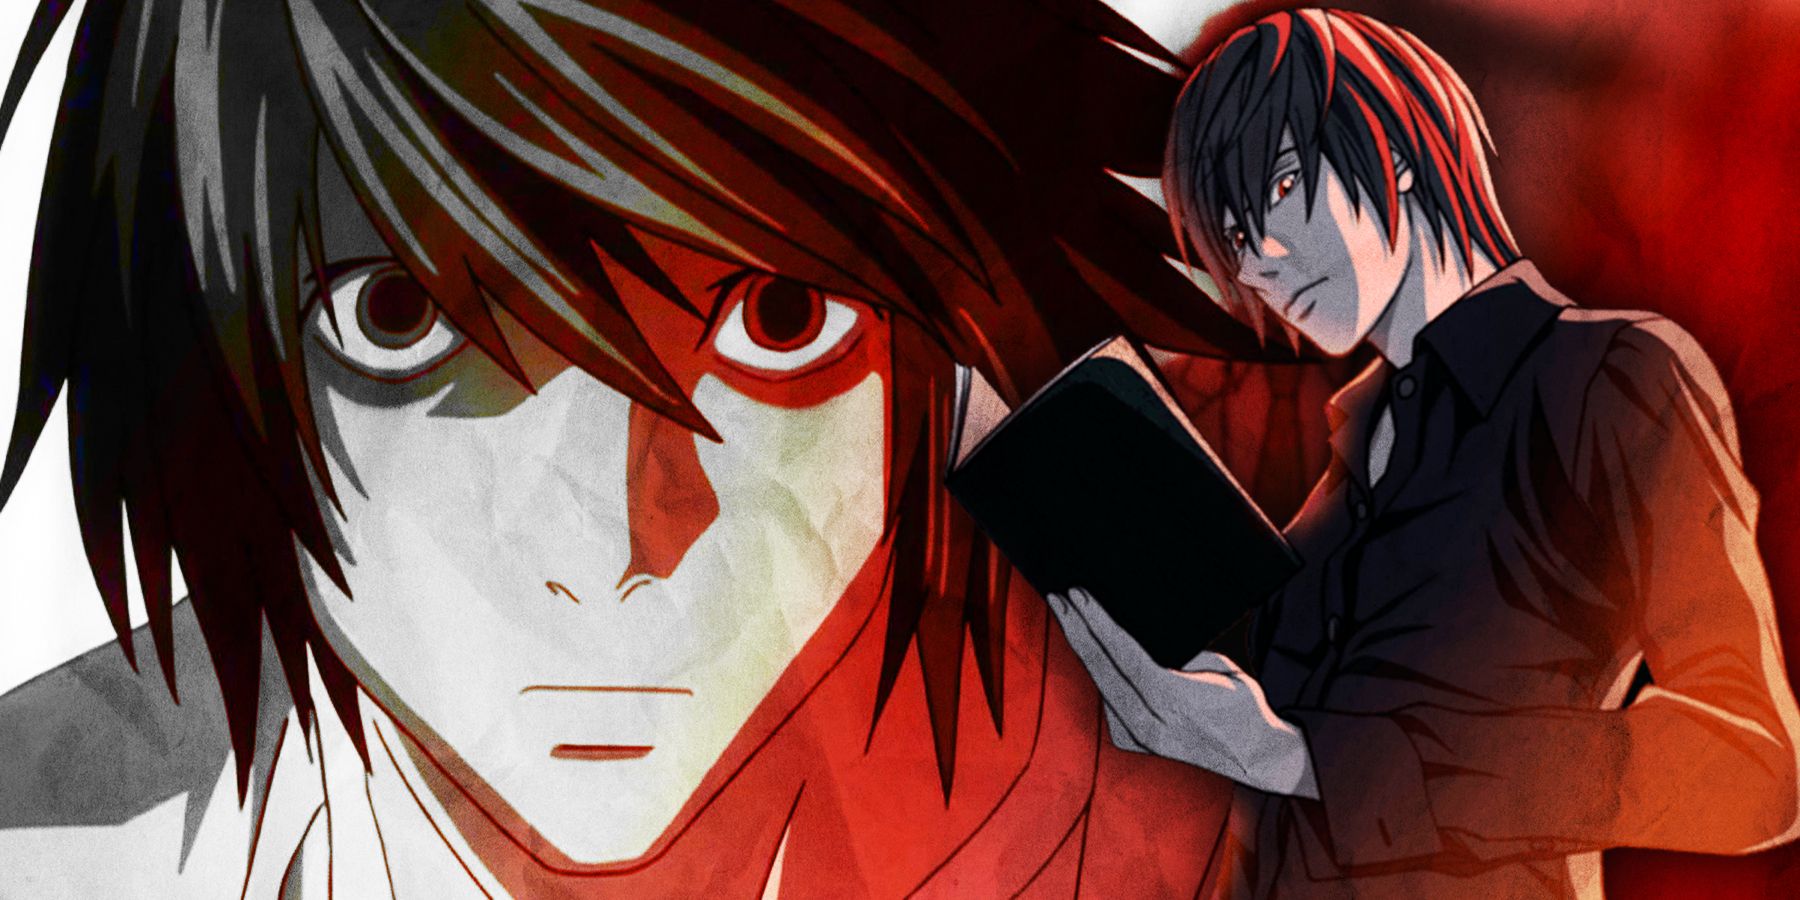 Death Note: Light Up the New World, by Welbe